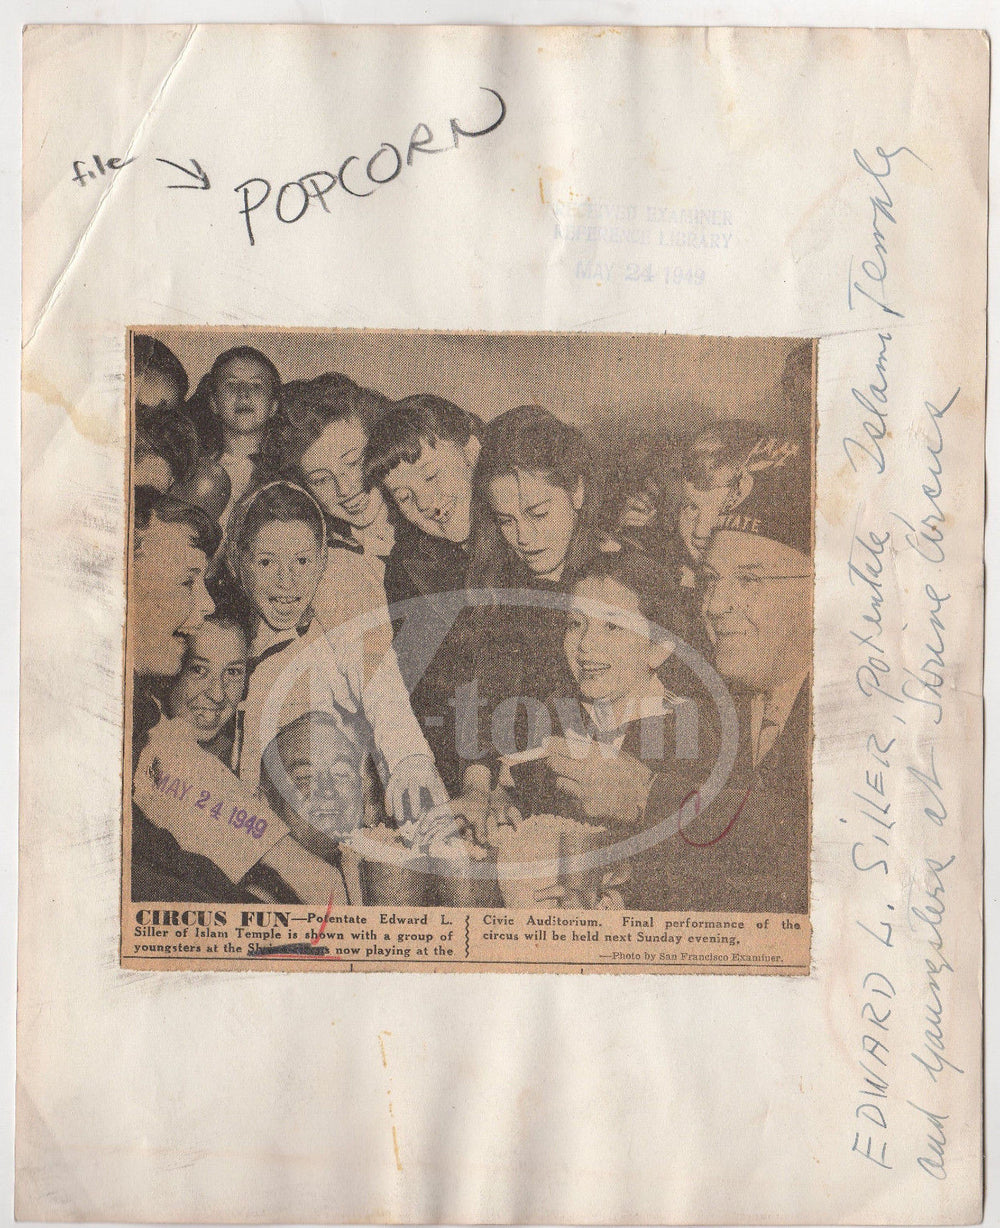 ISLAM TEMPLE SHRINERS CIRCUS KIDS EATING POPCORN VINTAGE NEWS PRESS PHOTOGRAPH - K-townConsignments